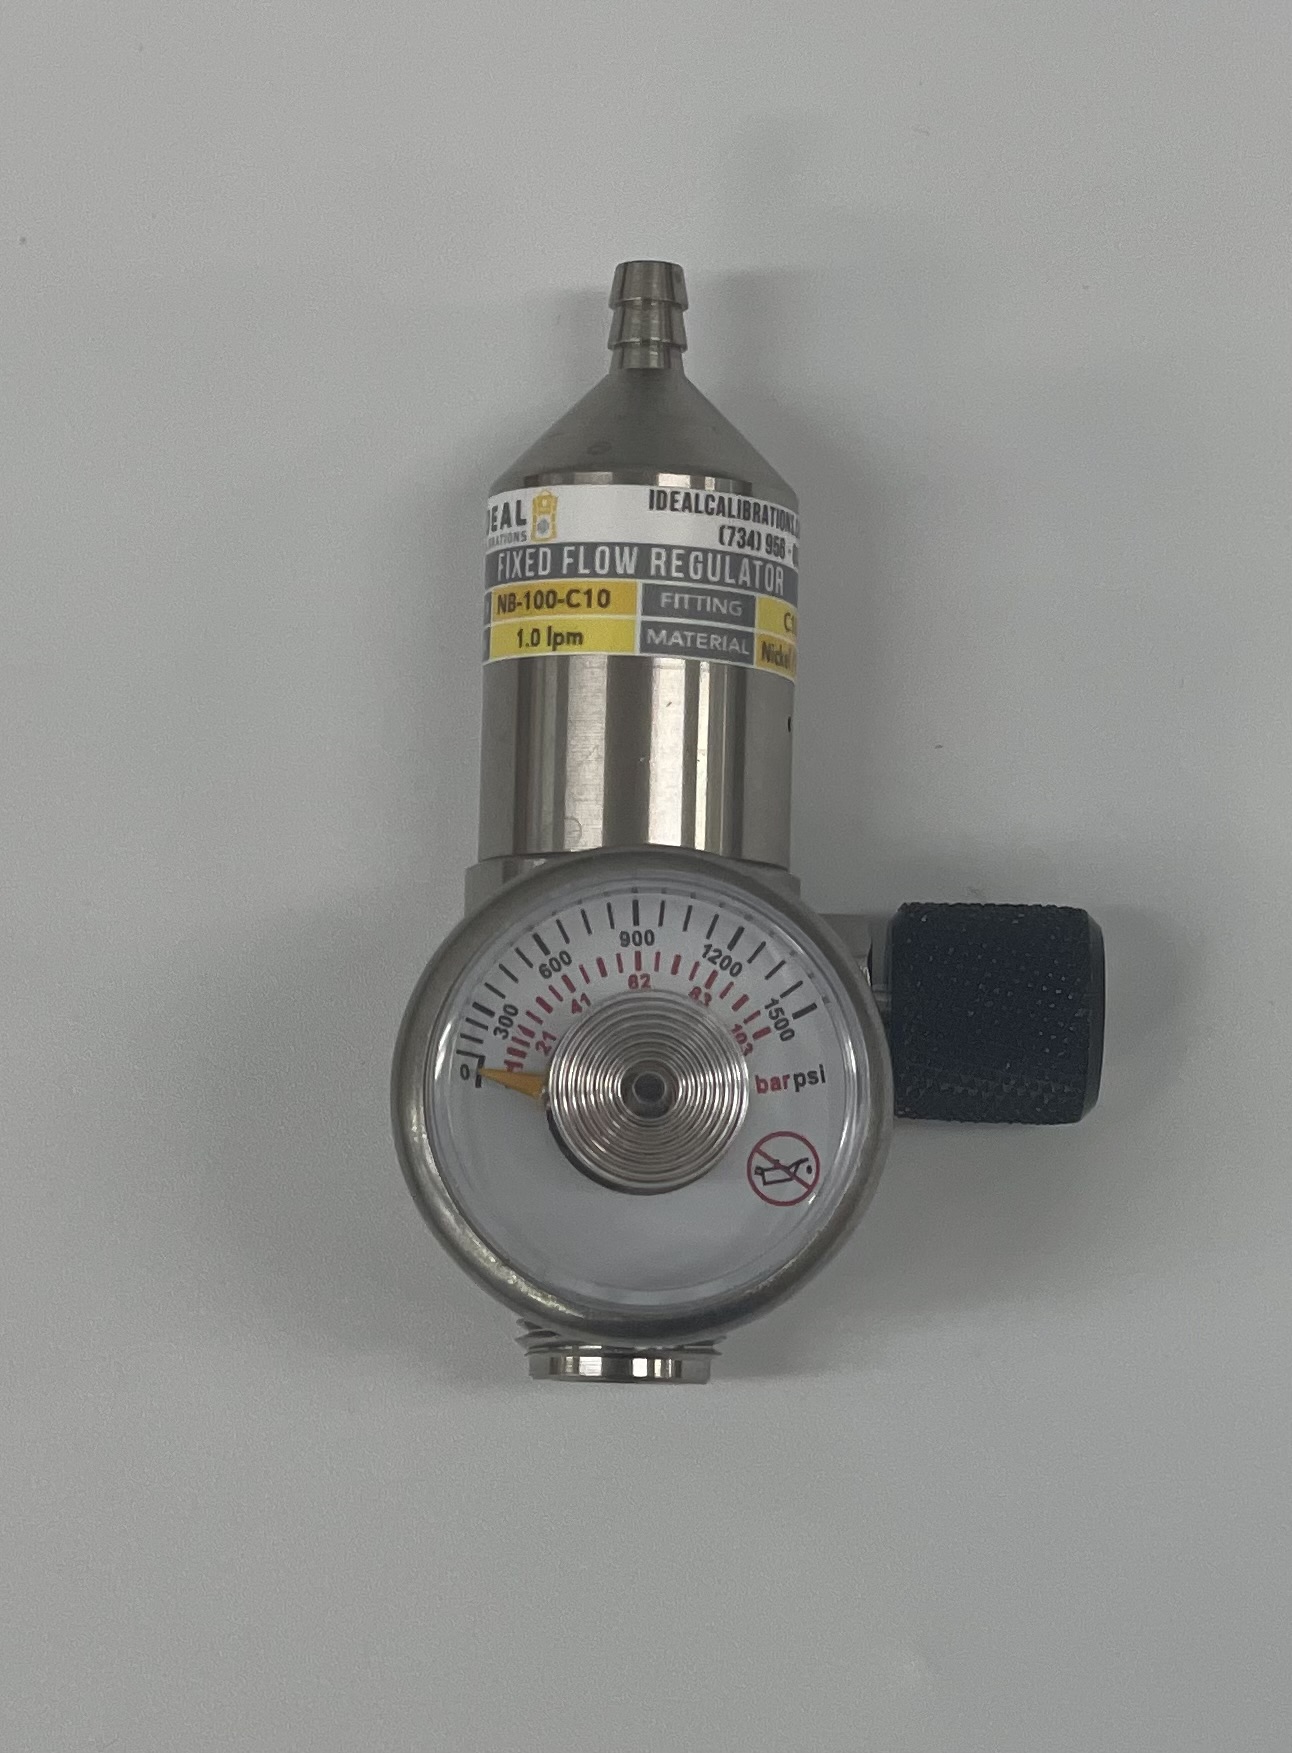 1.0 LPM Fixed Flow C10 Calibration Gas Regulator Questions & Answers